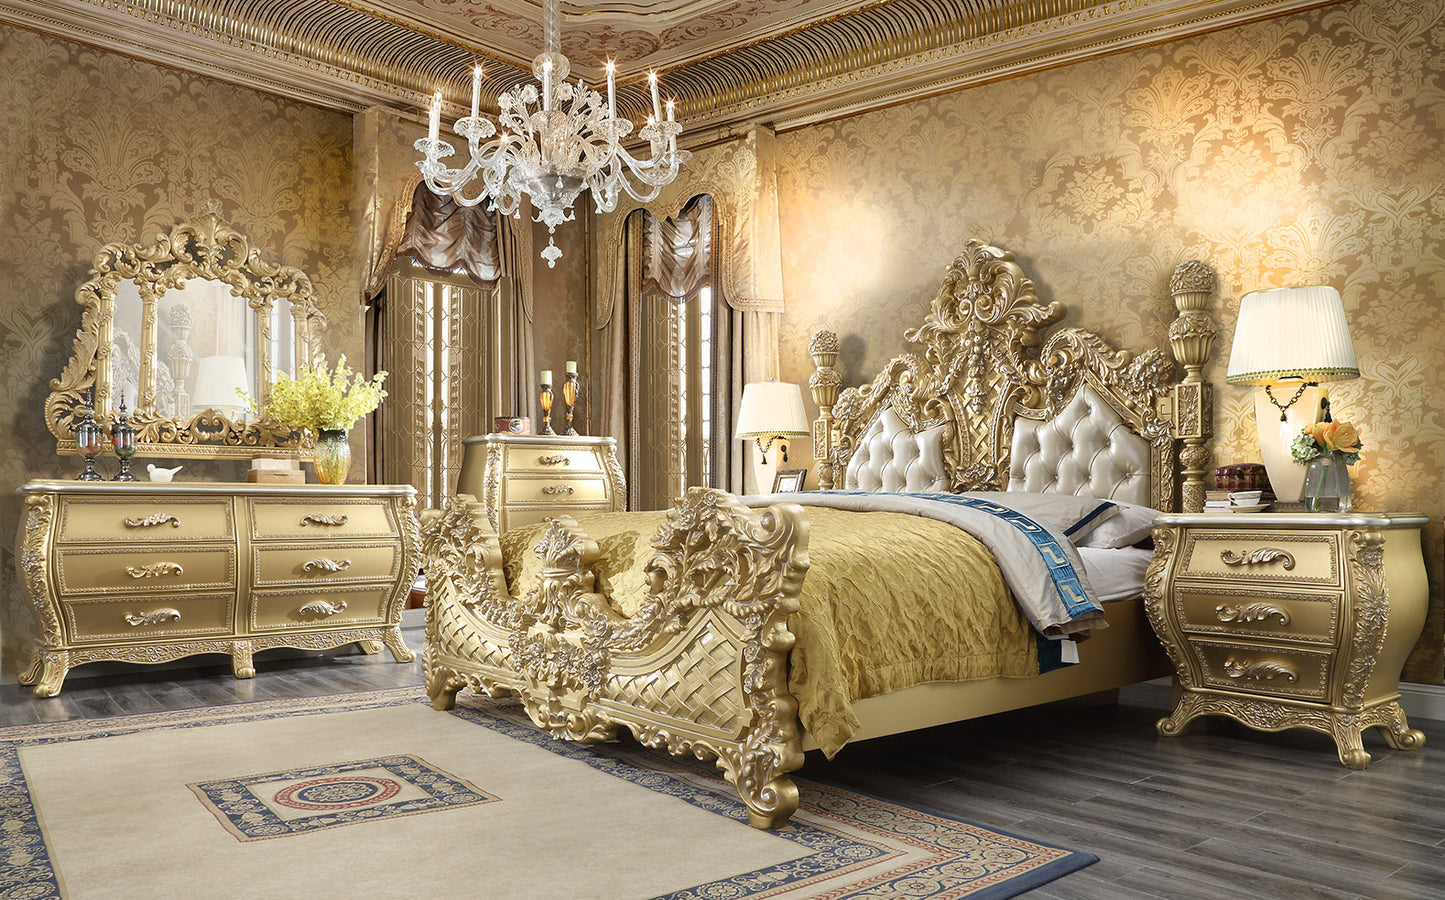 Leather Cal King 5PC Bedroom Set in Antique Gold Finish 1801-BSET5-CK European